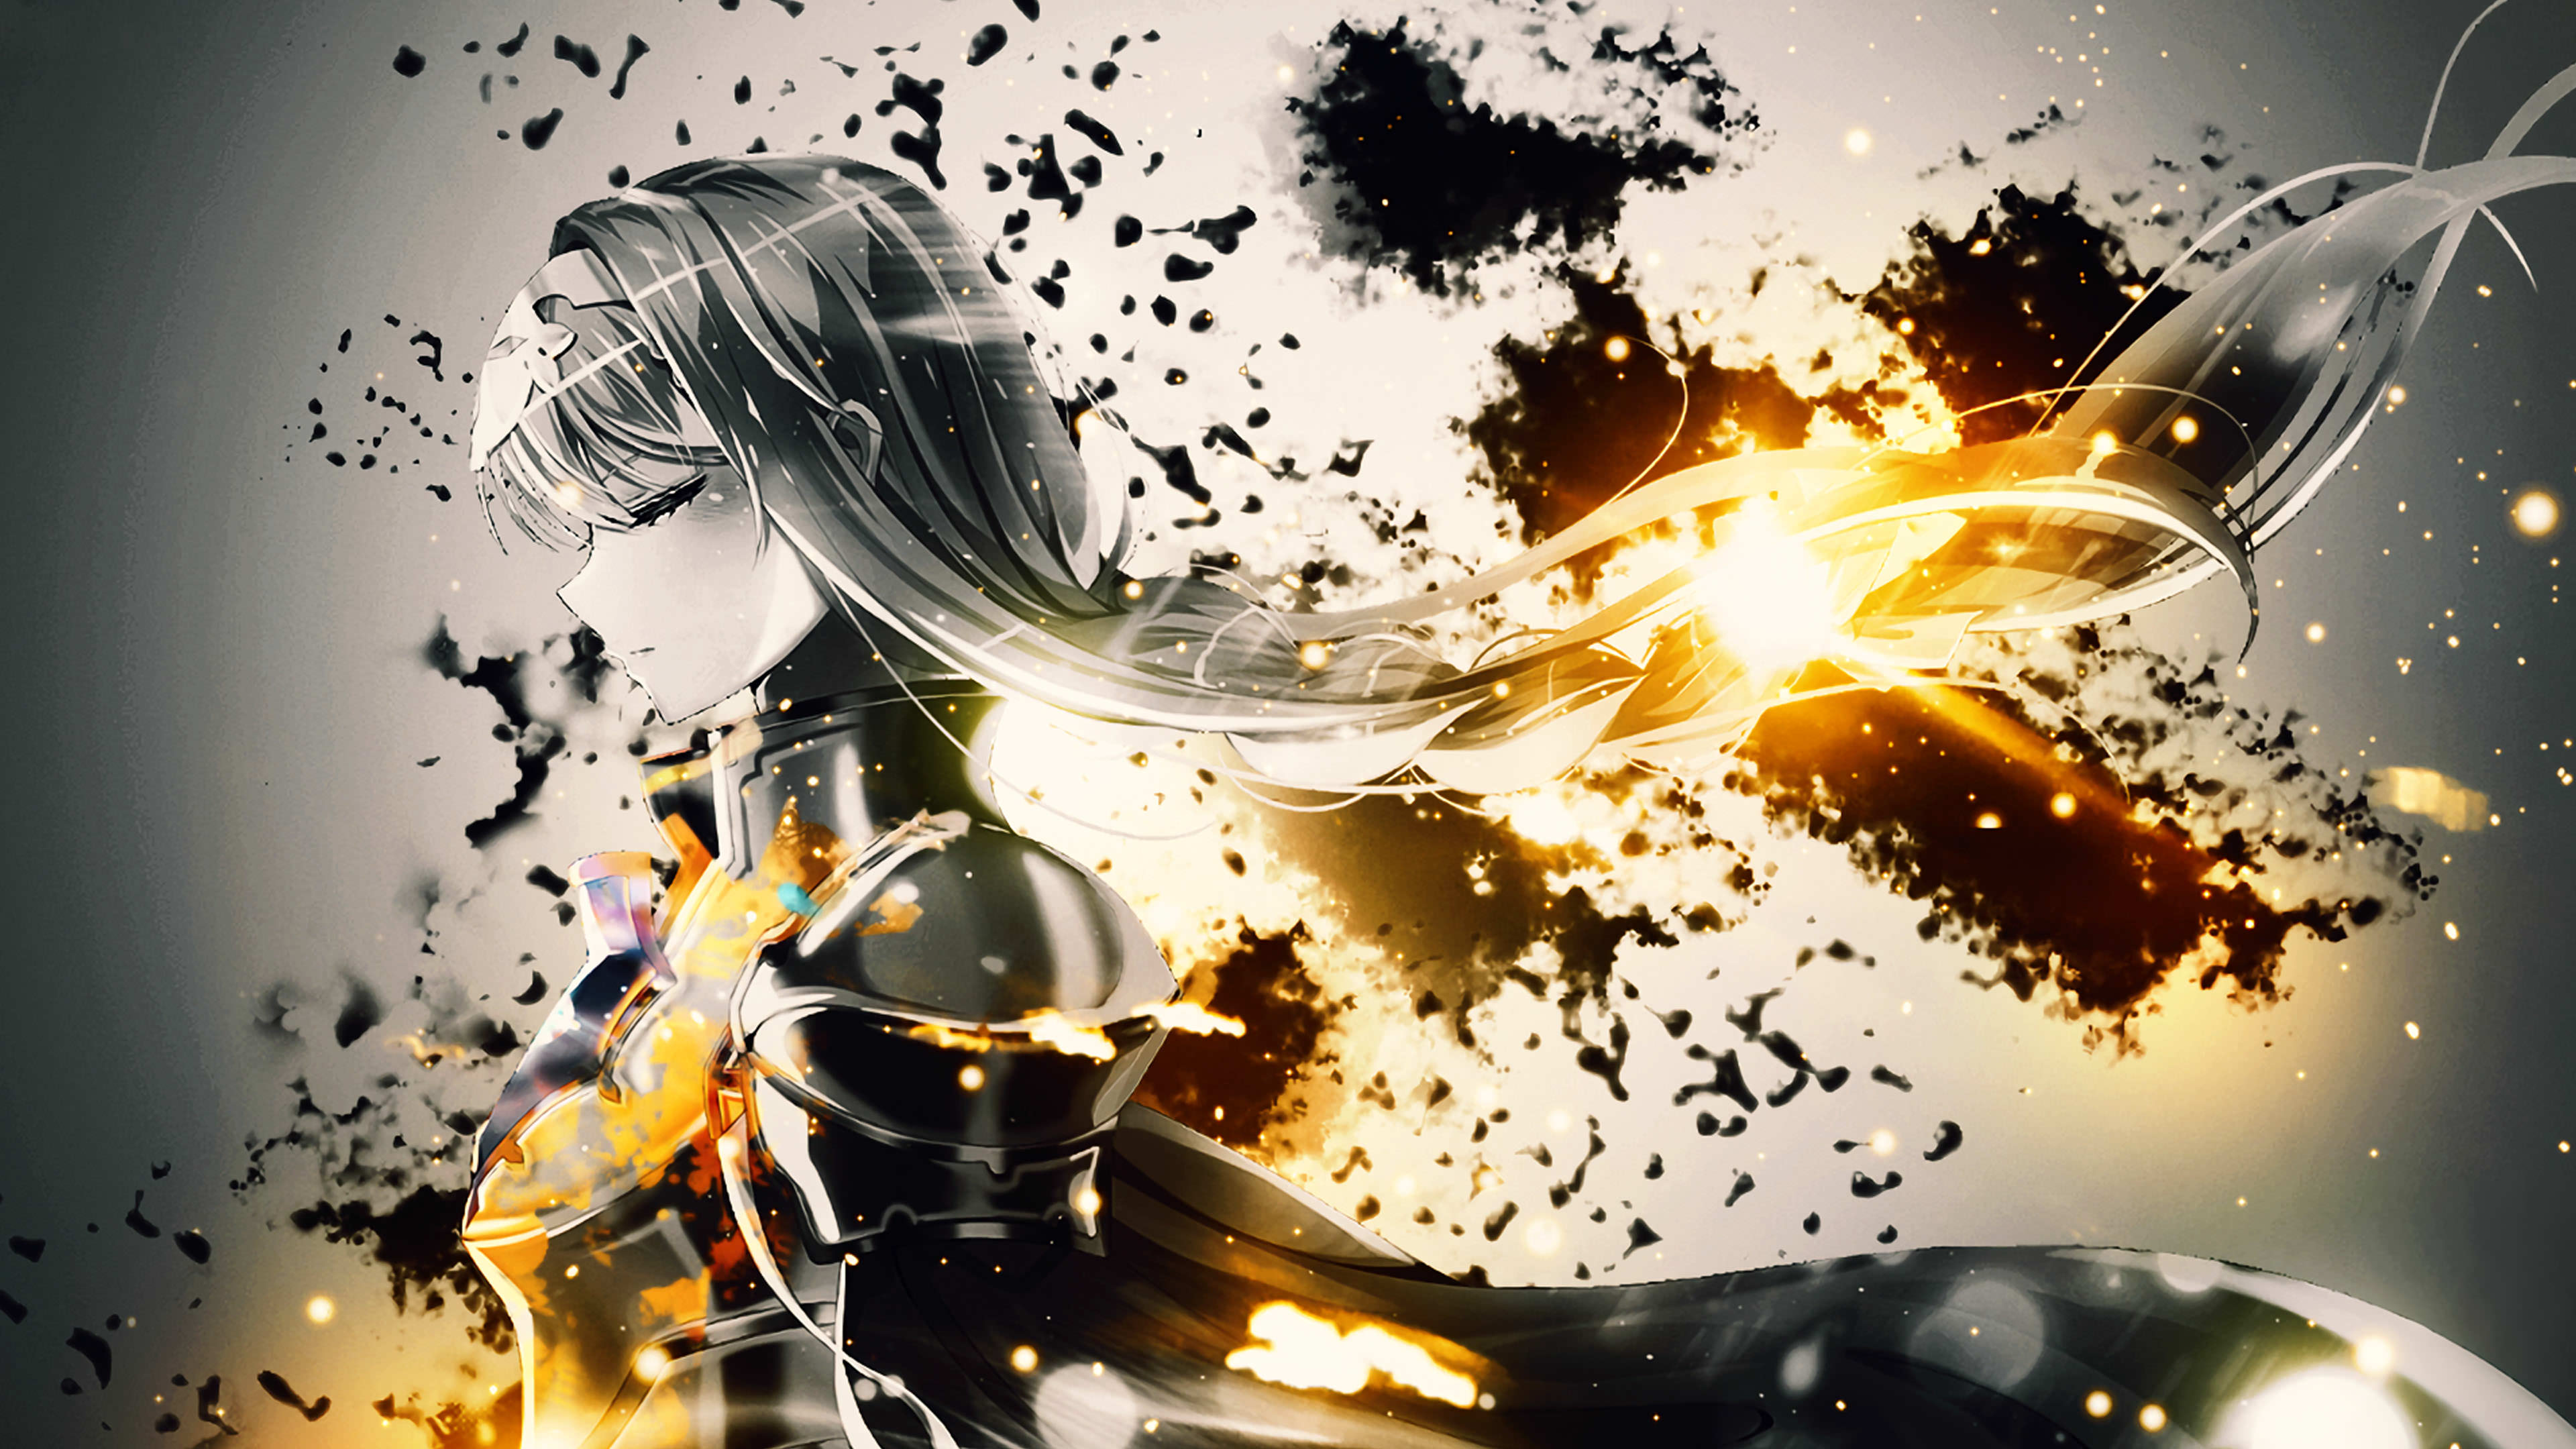 Beautiful Anime Wallpapers In High Resolution Templatefor